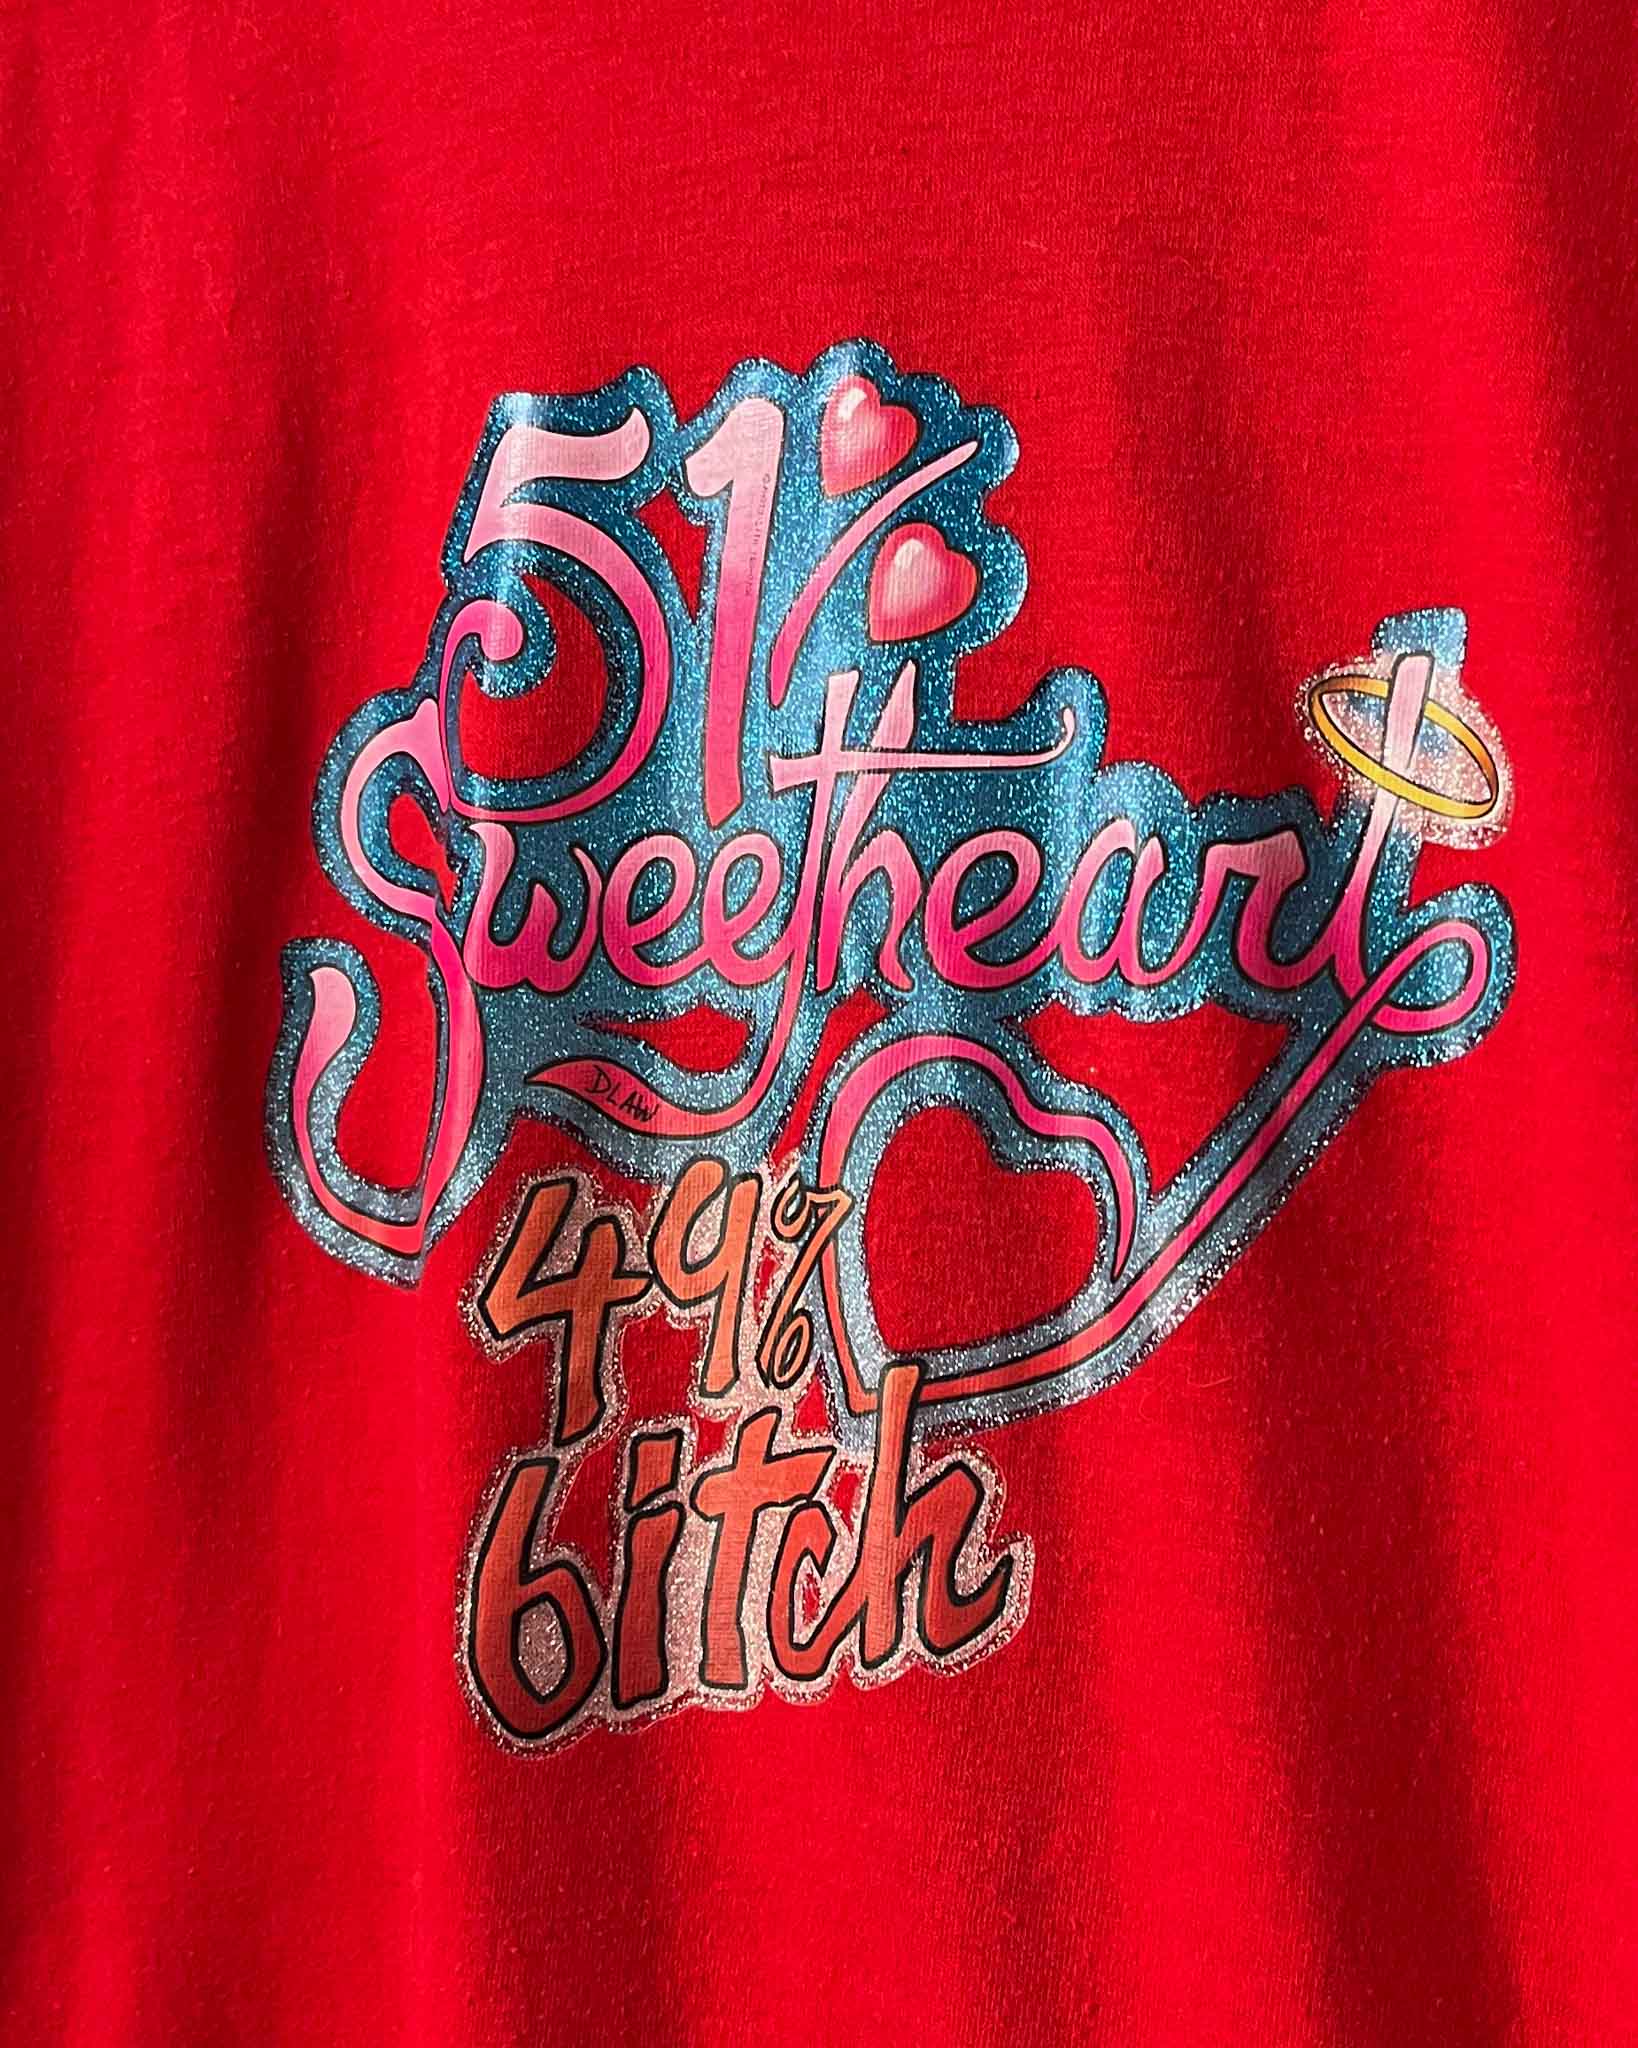 70s 51% Sweetheart Glitter Graphic T-shirt - Lucky Vintage